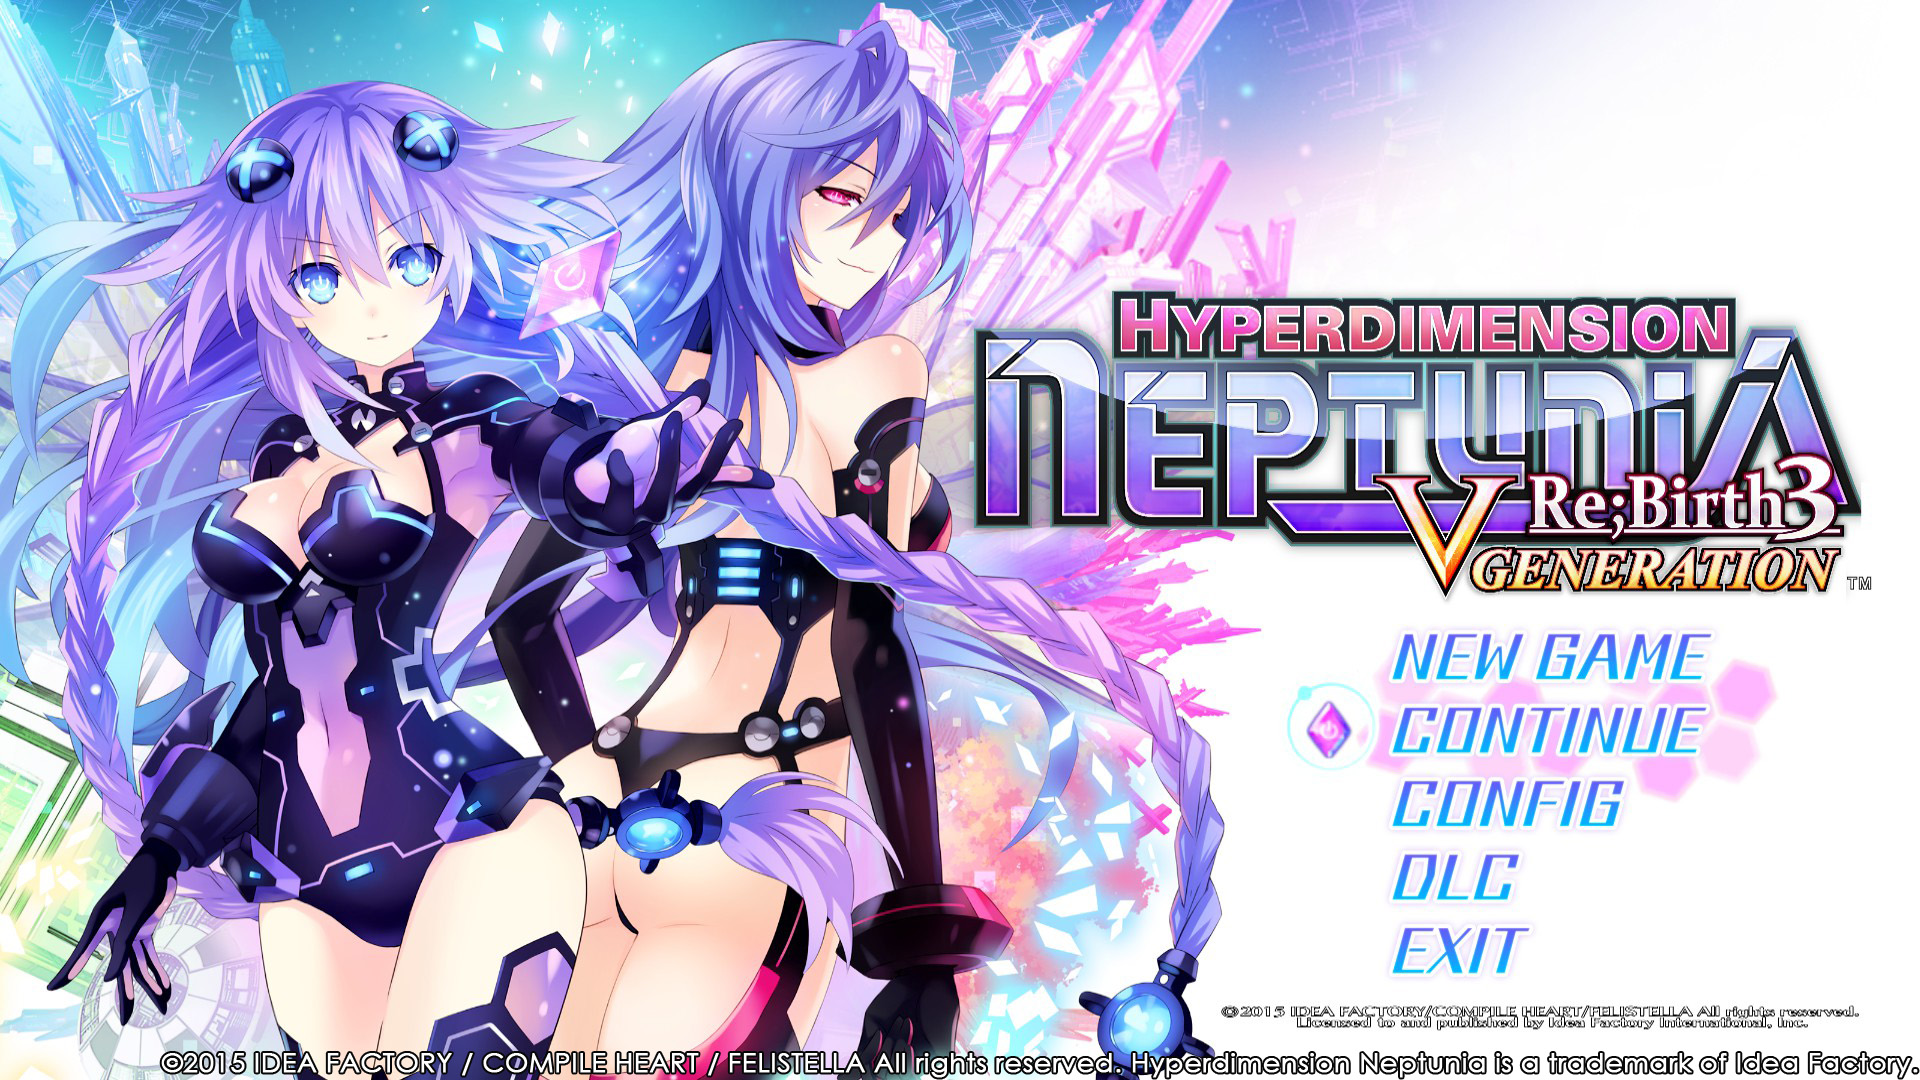 Find the best computers for Hyperdimension Neptunia Re;Birth3 V Generation